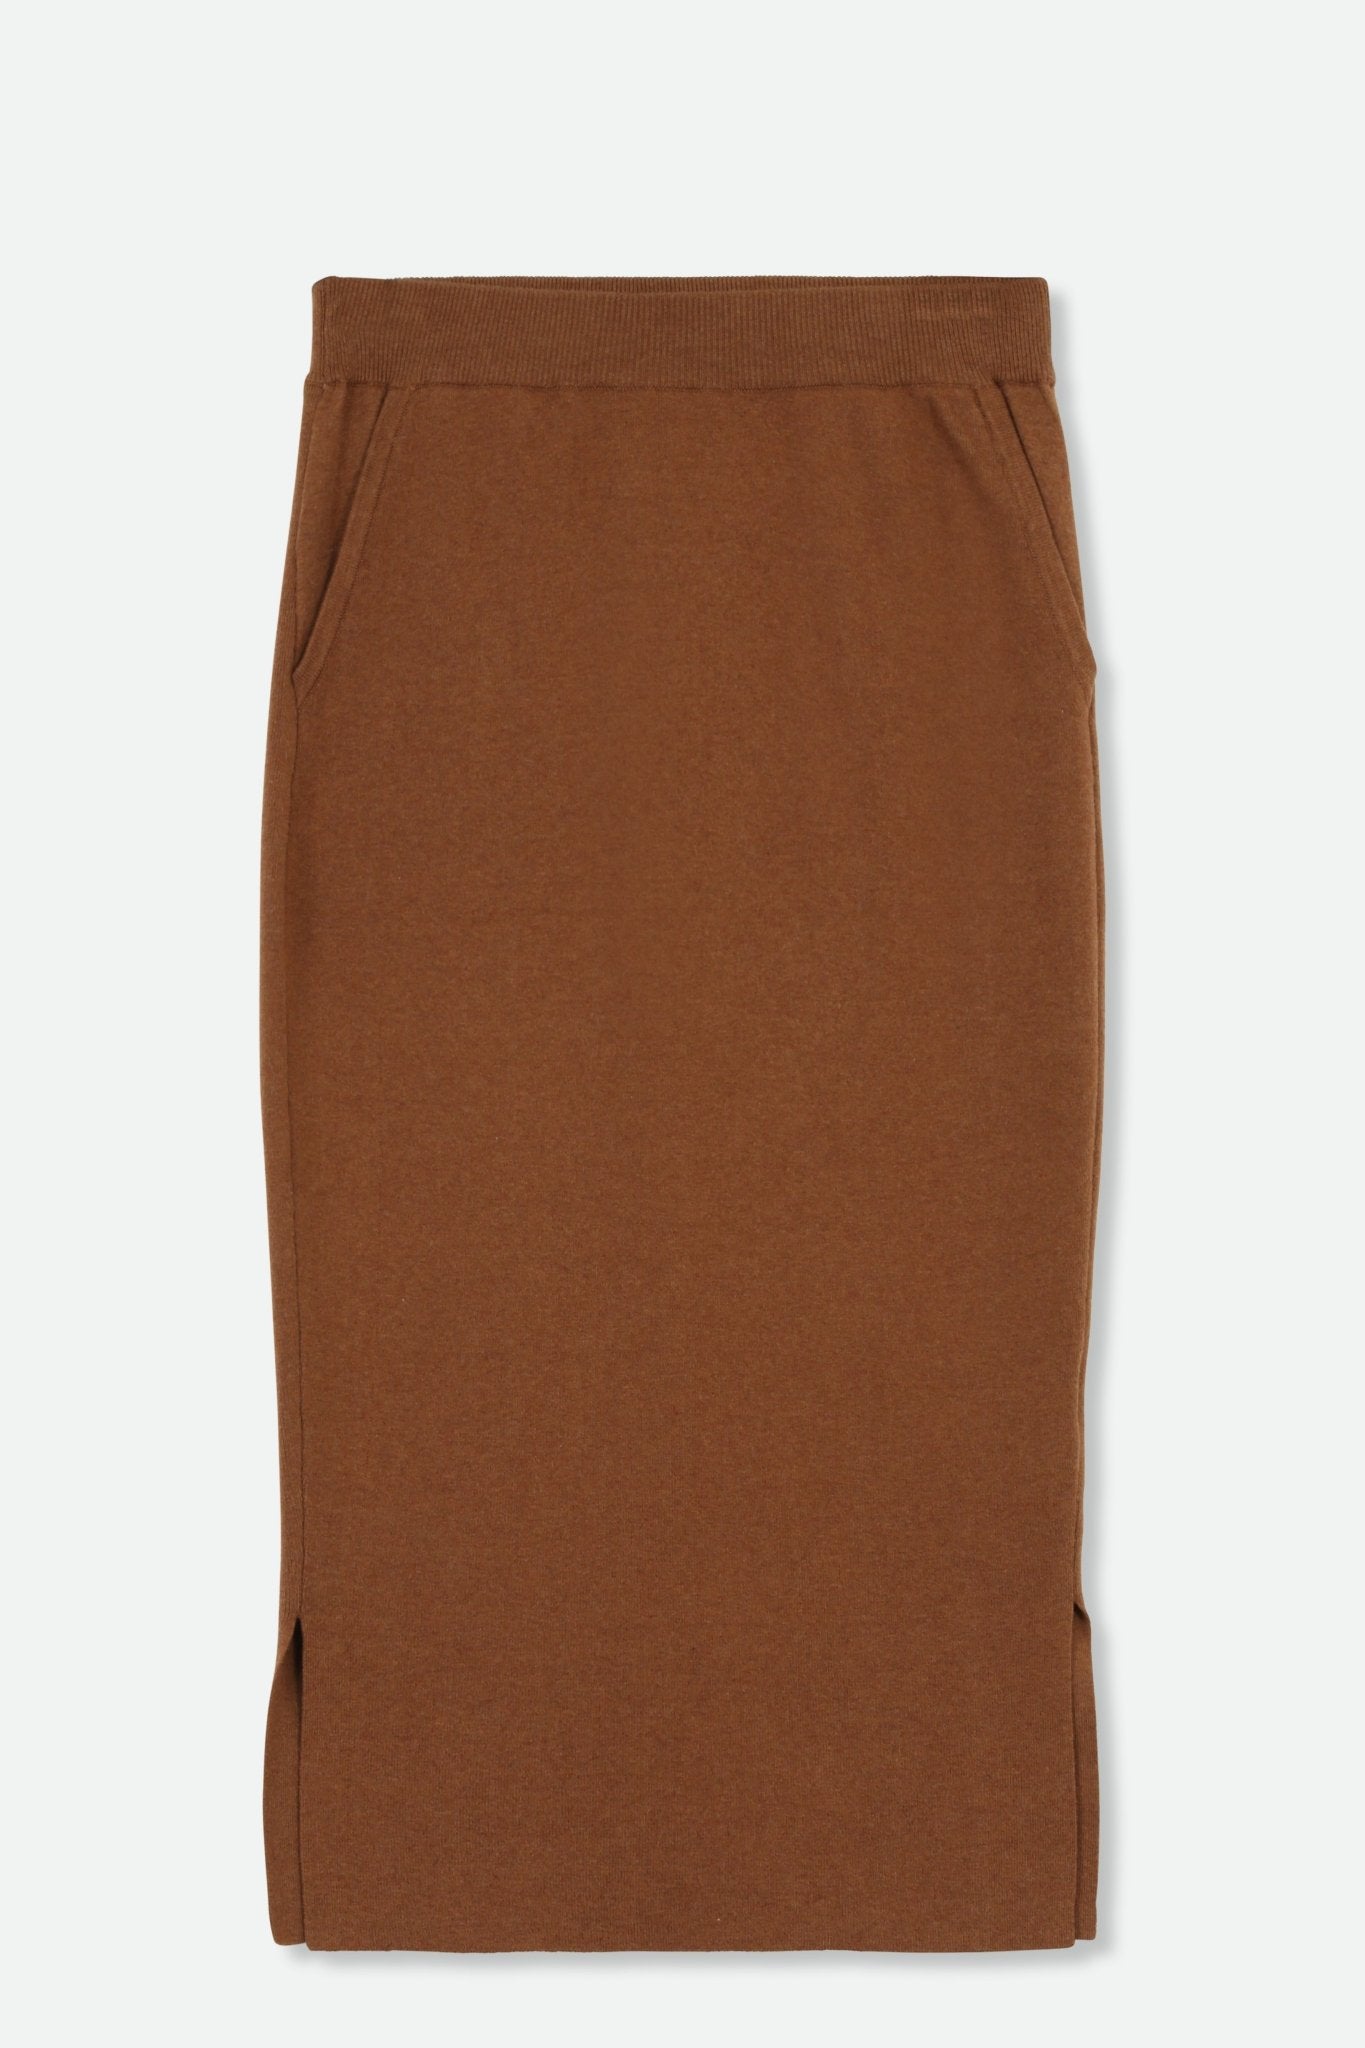 Heather Knit Elastic Waistband Skirt with Side Pockets